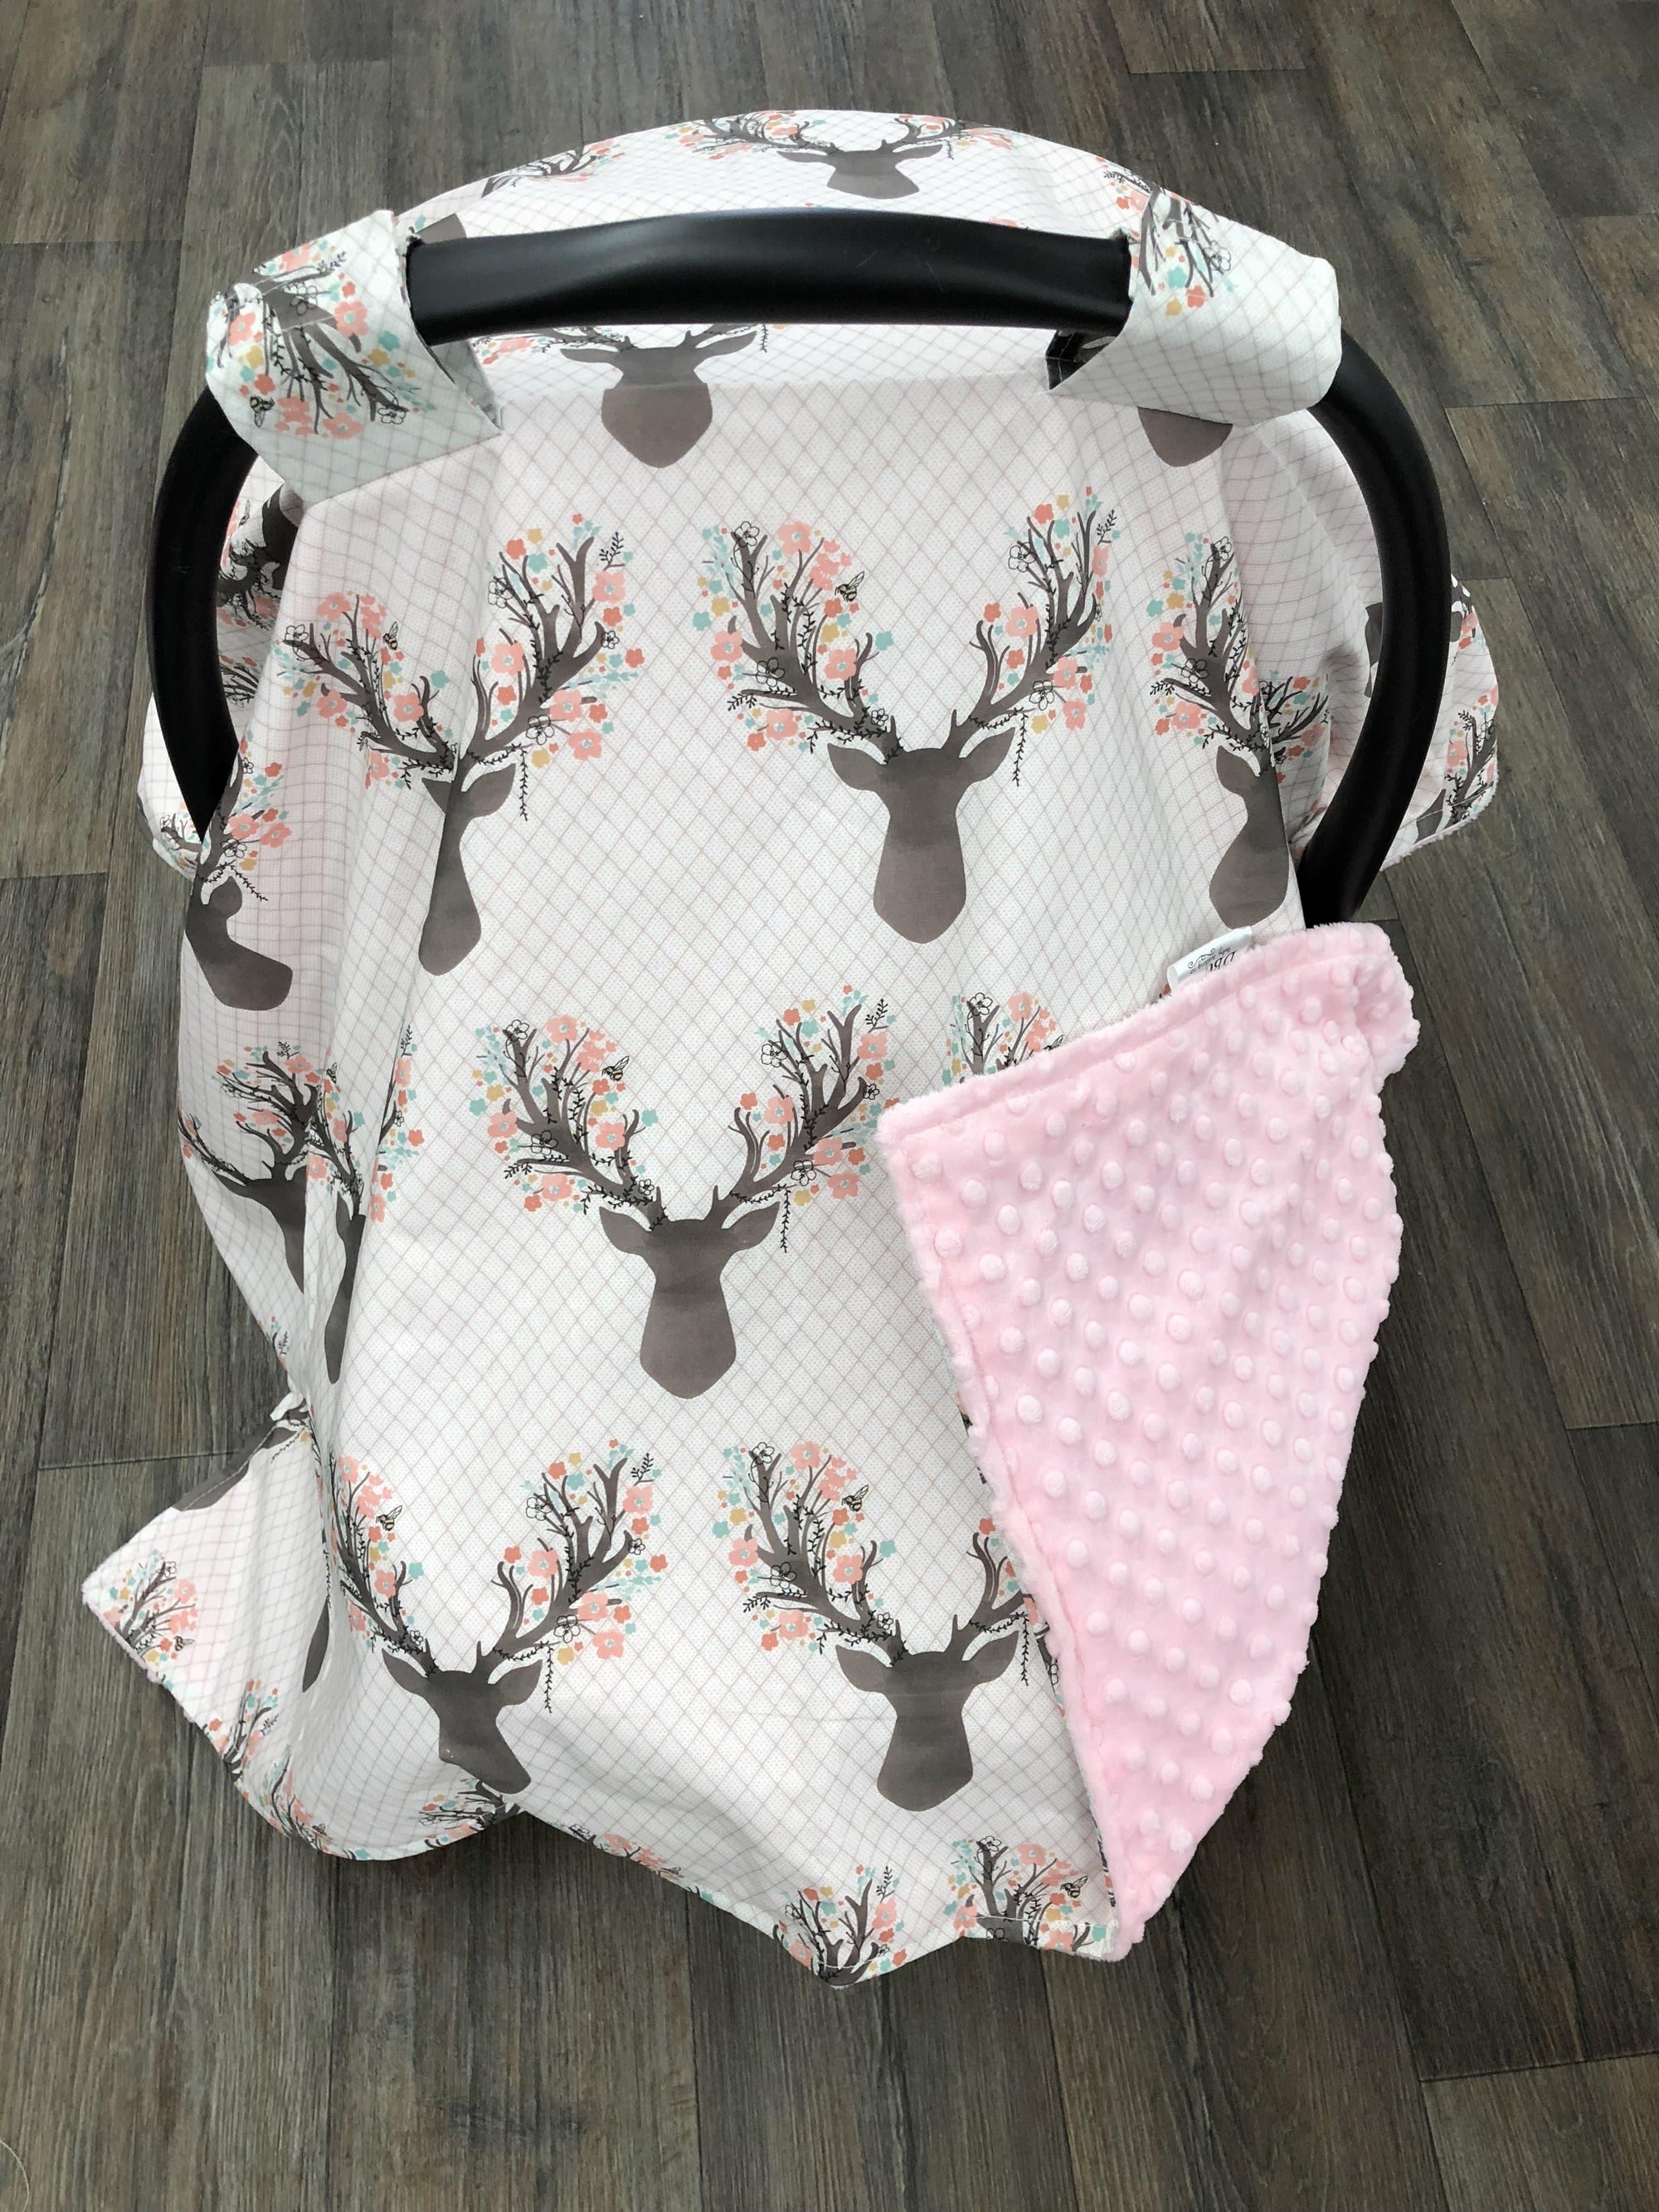 Carseat Tent - Fawn Tulip Carseat Canopy, Tent, Cover, Deer, Flowers - DBC Baby Bedding Co 